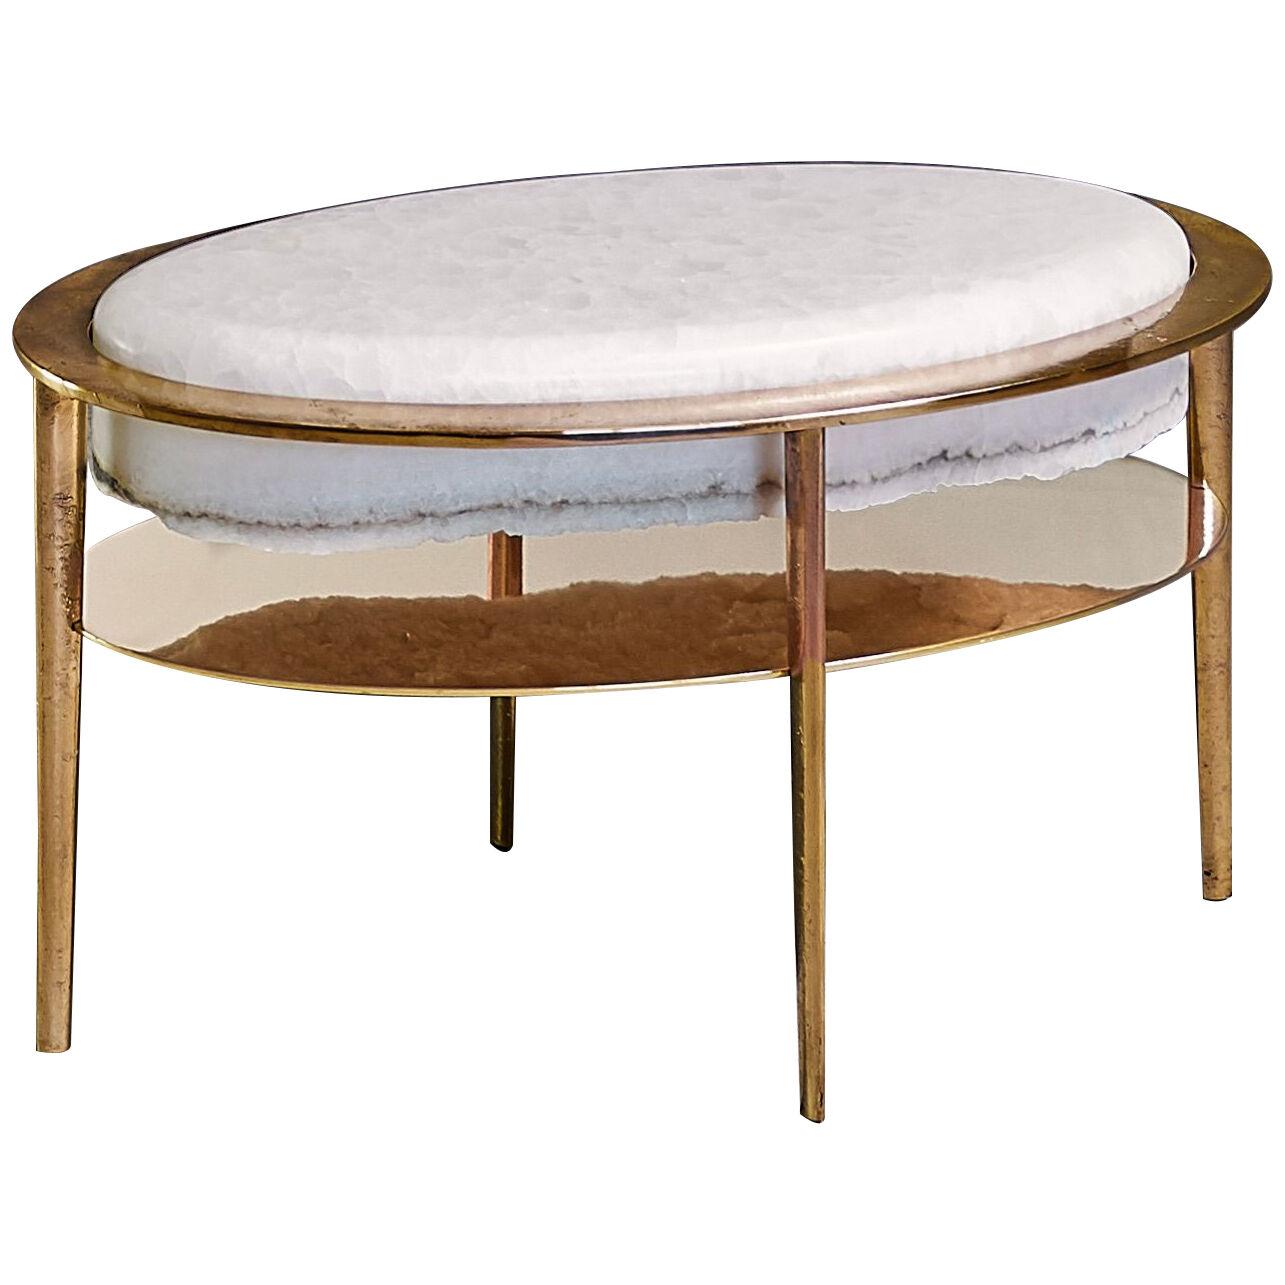 Sculptural Side Table Oval Cremino by Gianluca Pacchioni White Onyx Top